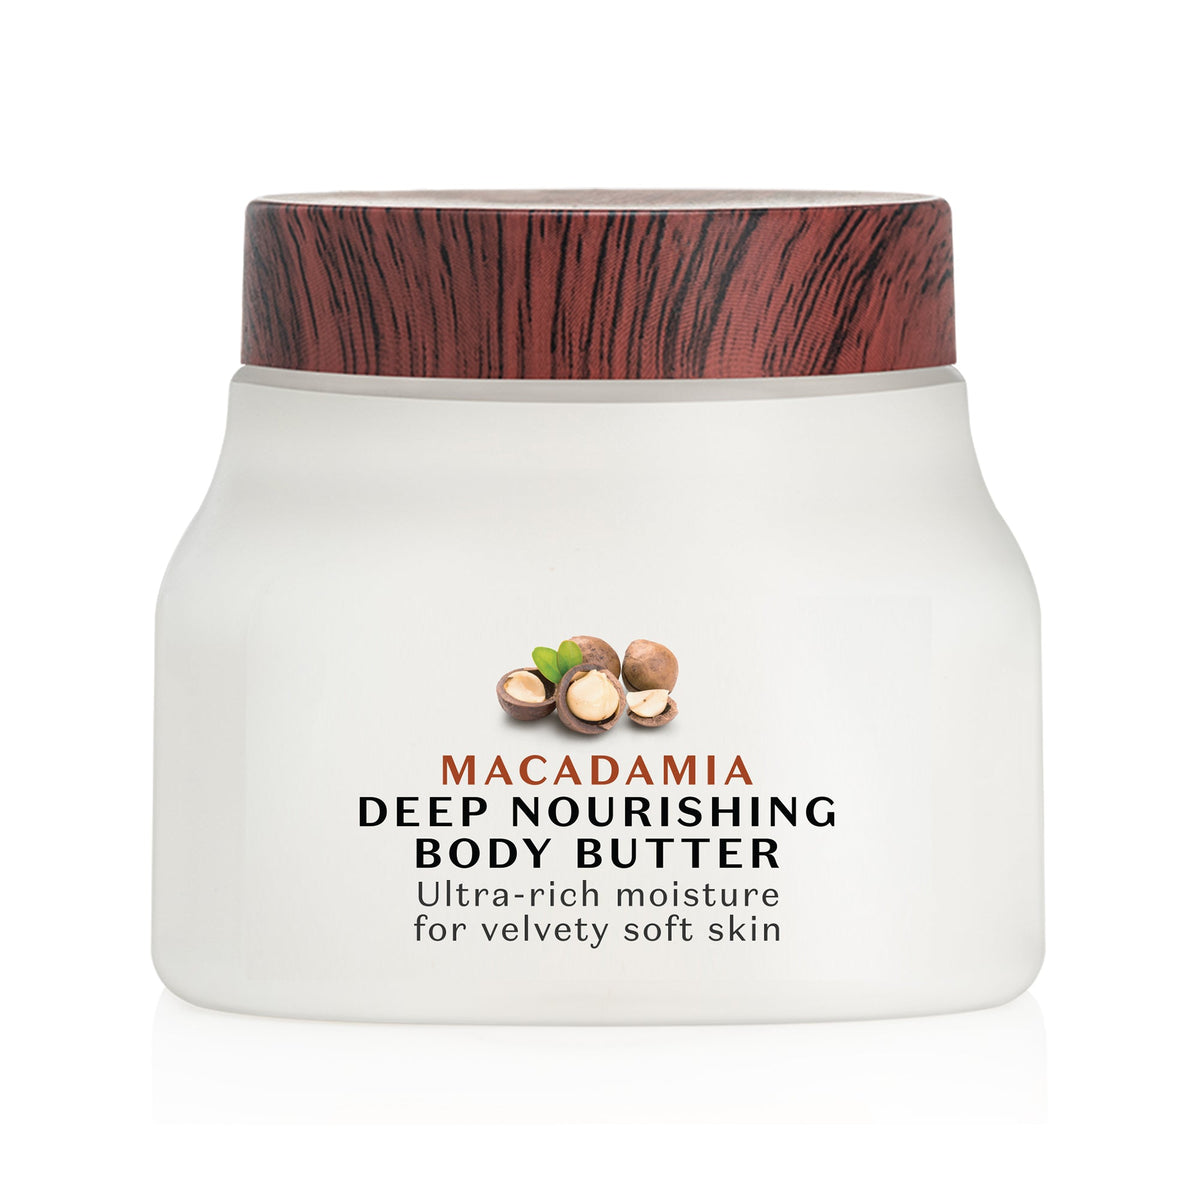 [CRED] Macadamia Deep Nourishing Body Butter | From the makers of Parachute Advansed | 140 ml